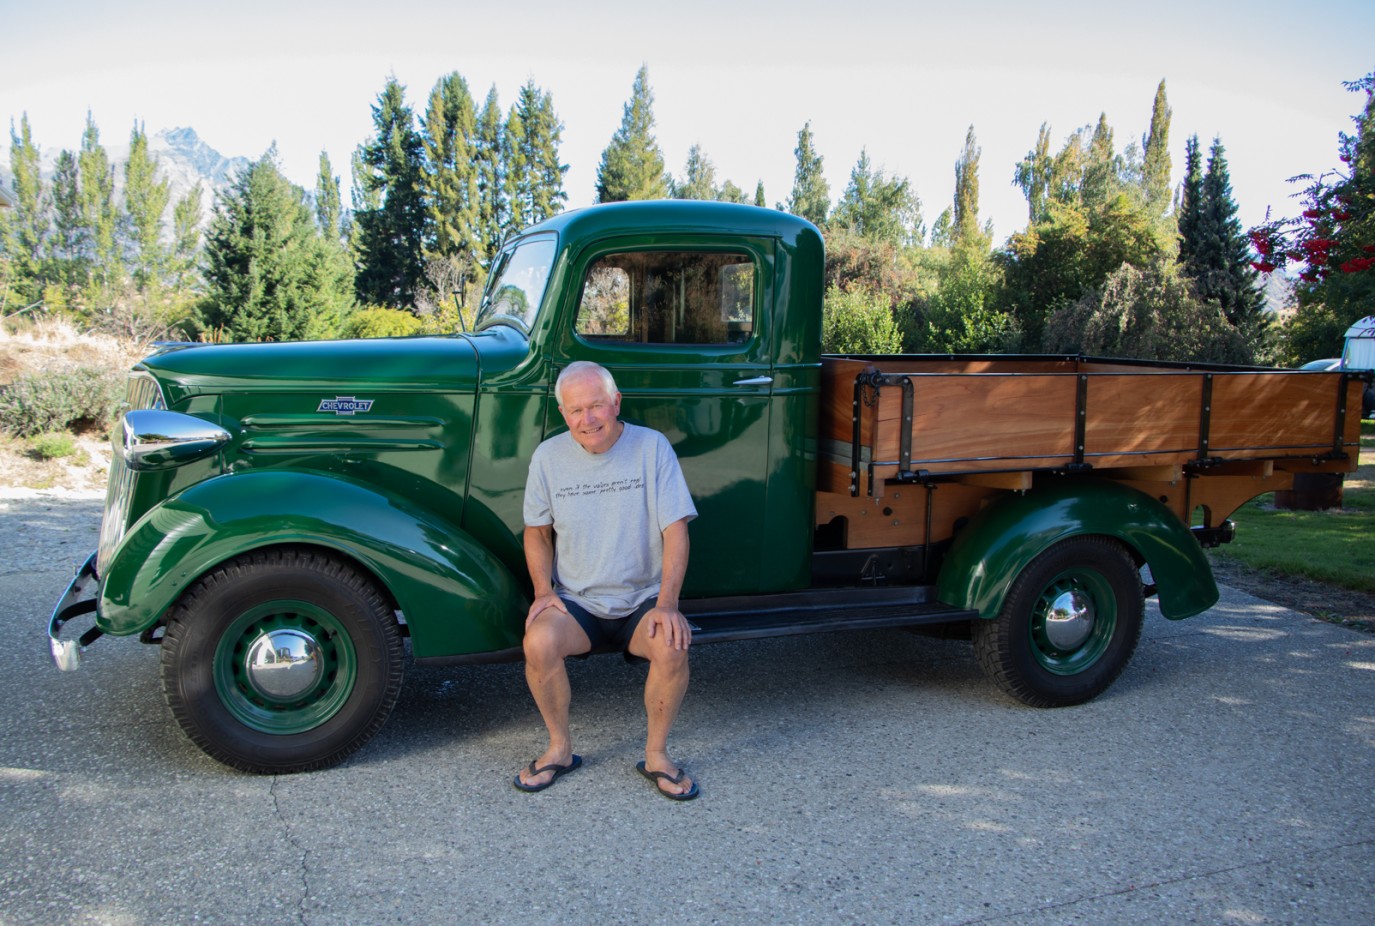 Bruce with Suzys grandfathers Wakatipu milk truck chevy that he has faithfully restored